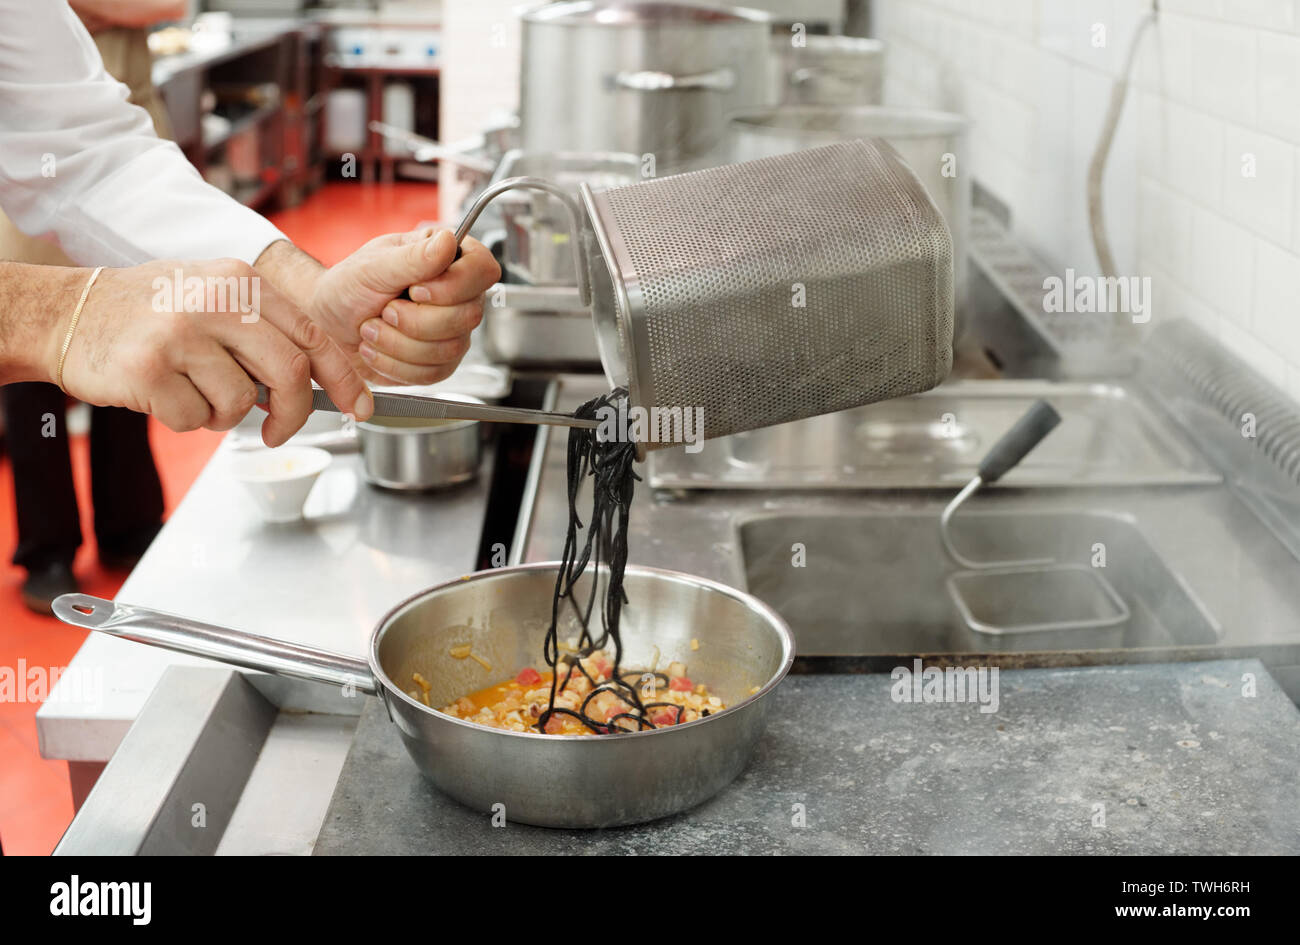 https://c8.alamy.com/comp/TWH6RH/chef-is-cooking-pasta-with-seafood-at-commercial-kitchen-TWH6RH.jpg